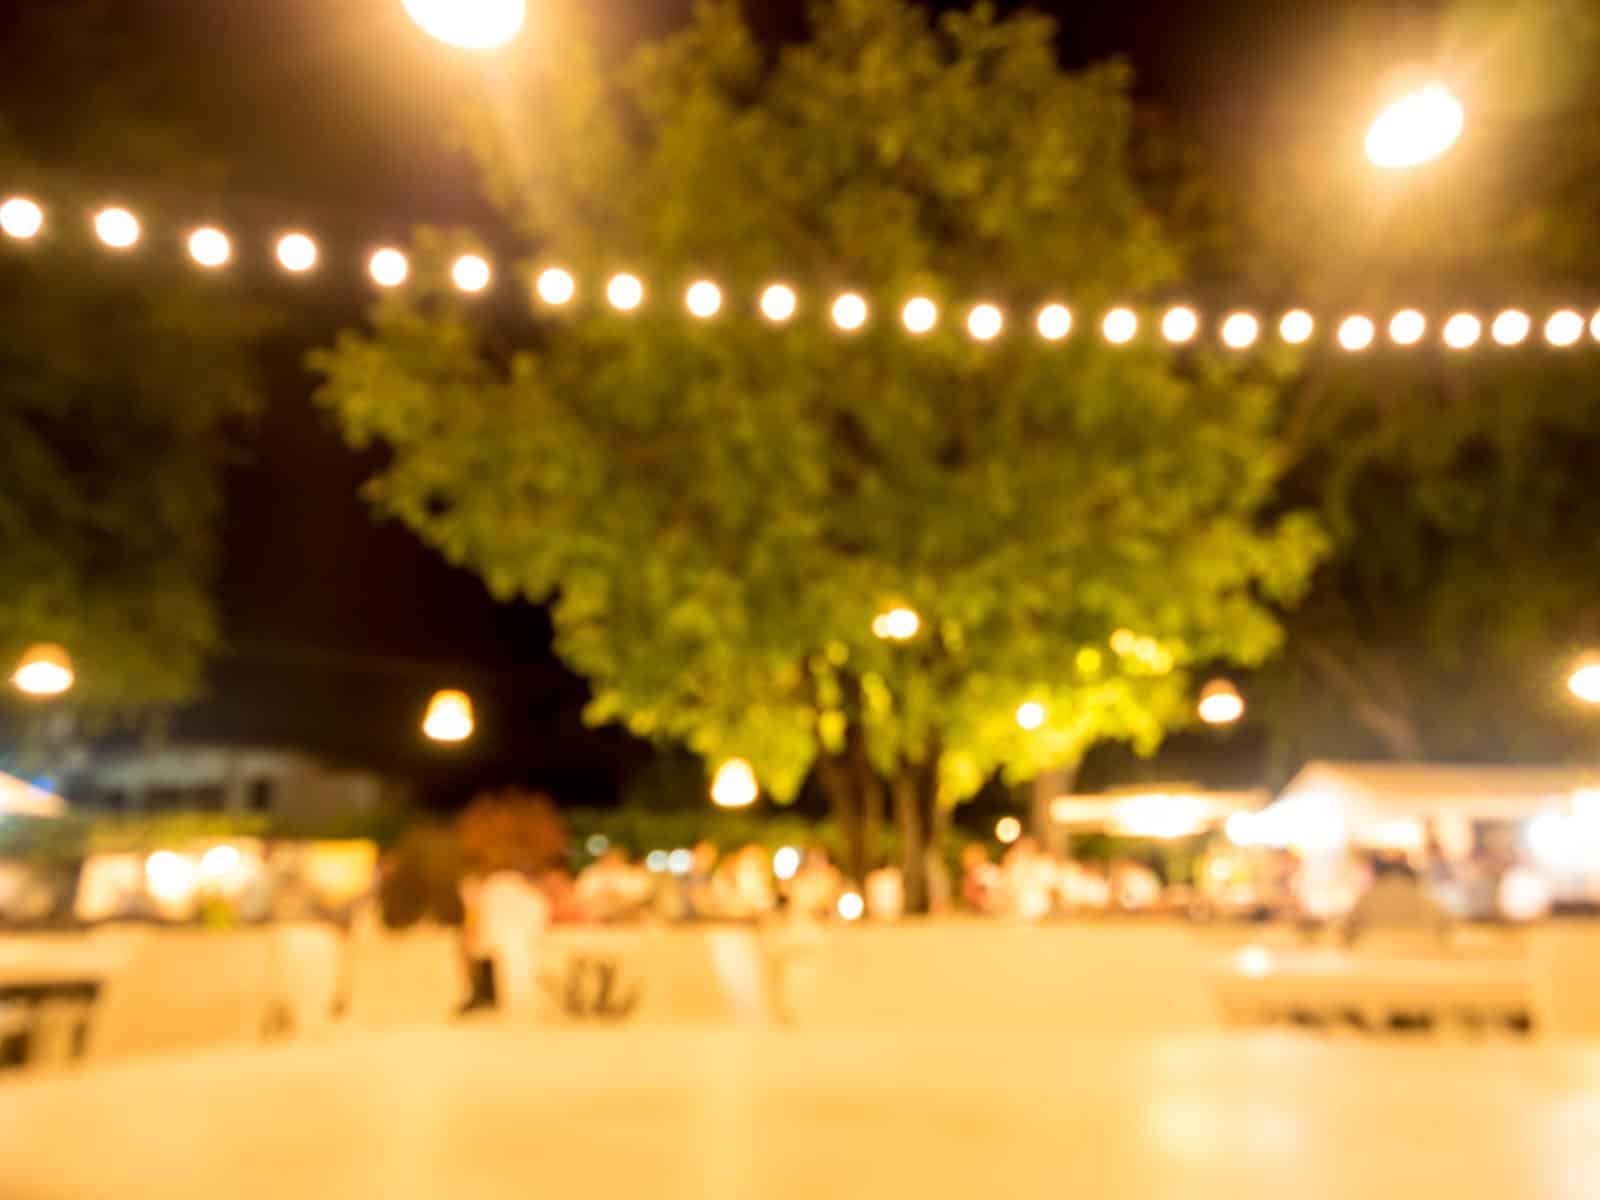 Blurred background of Garden lights illuminate the party.